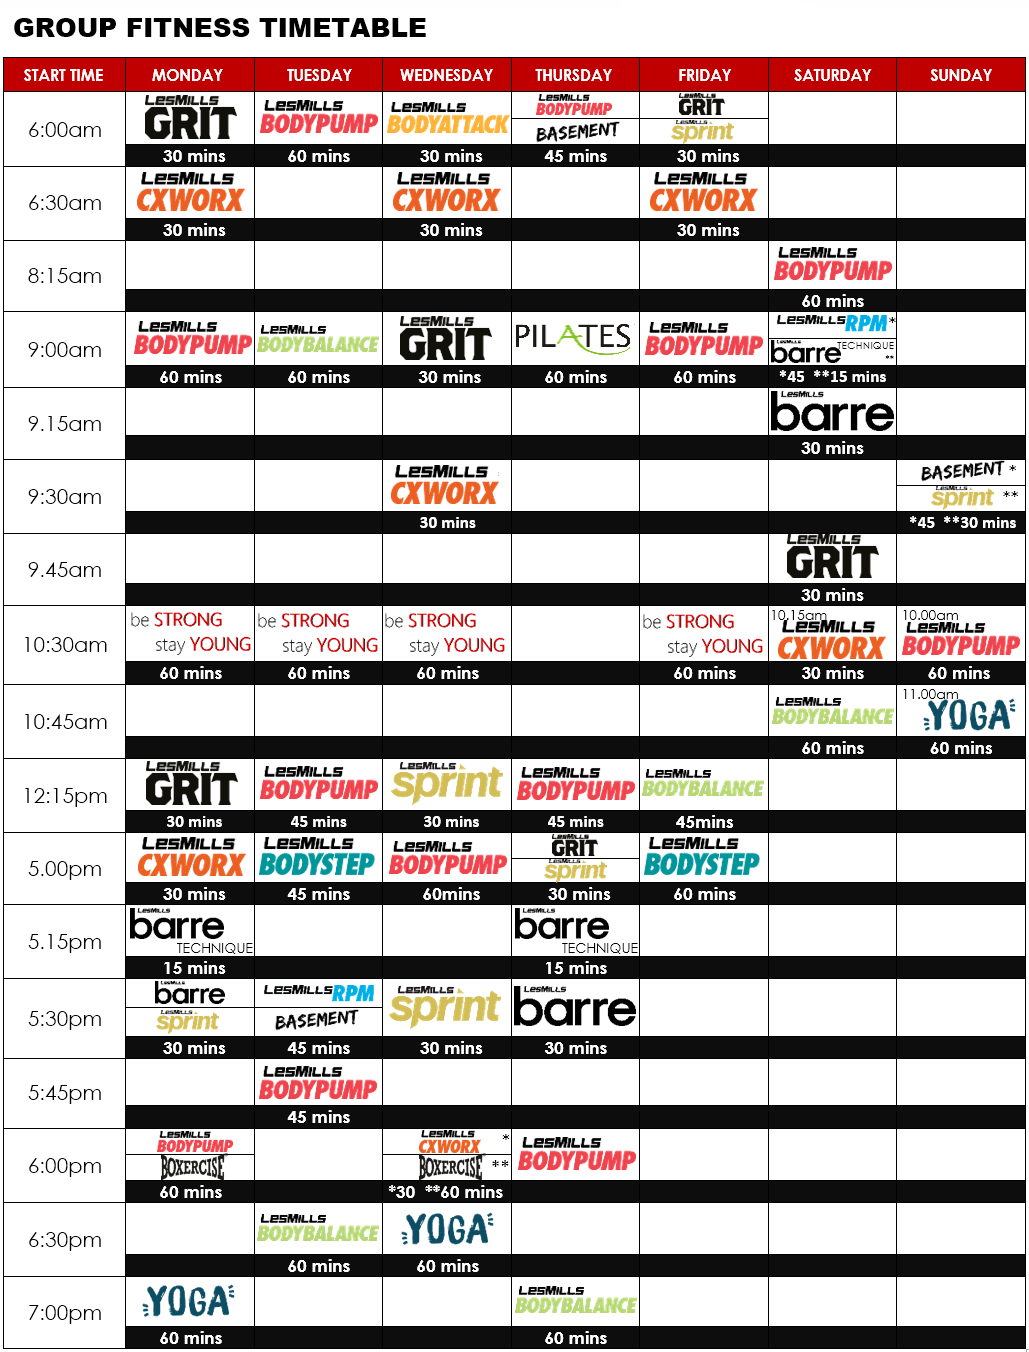 Group Fitness Timetable City 2019 – FitnessWorks NT